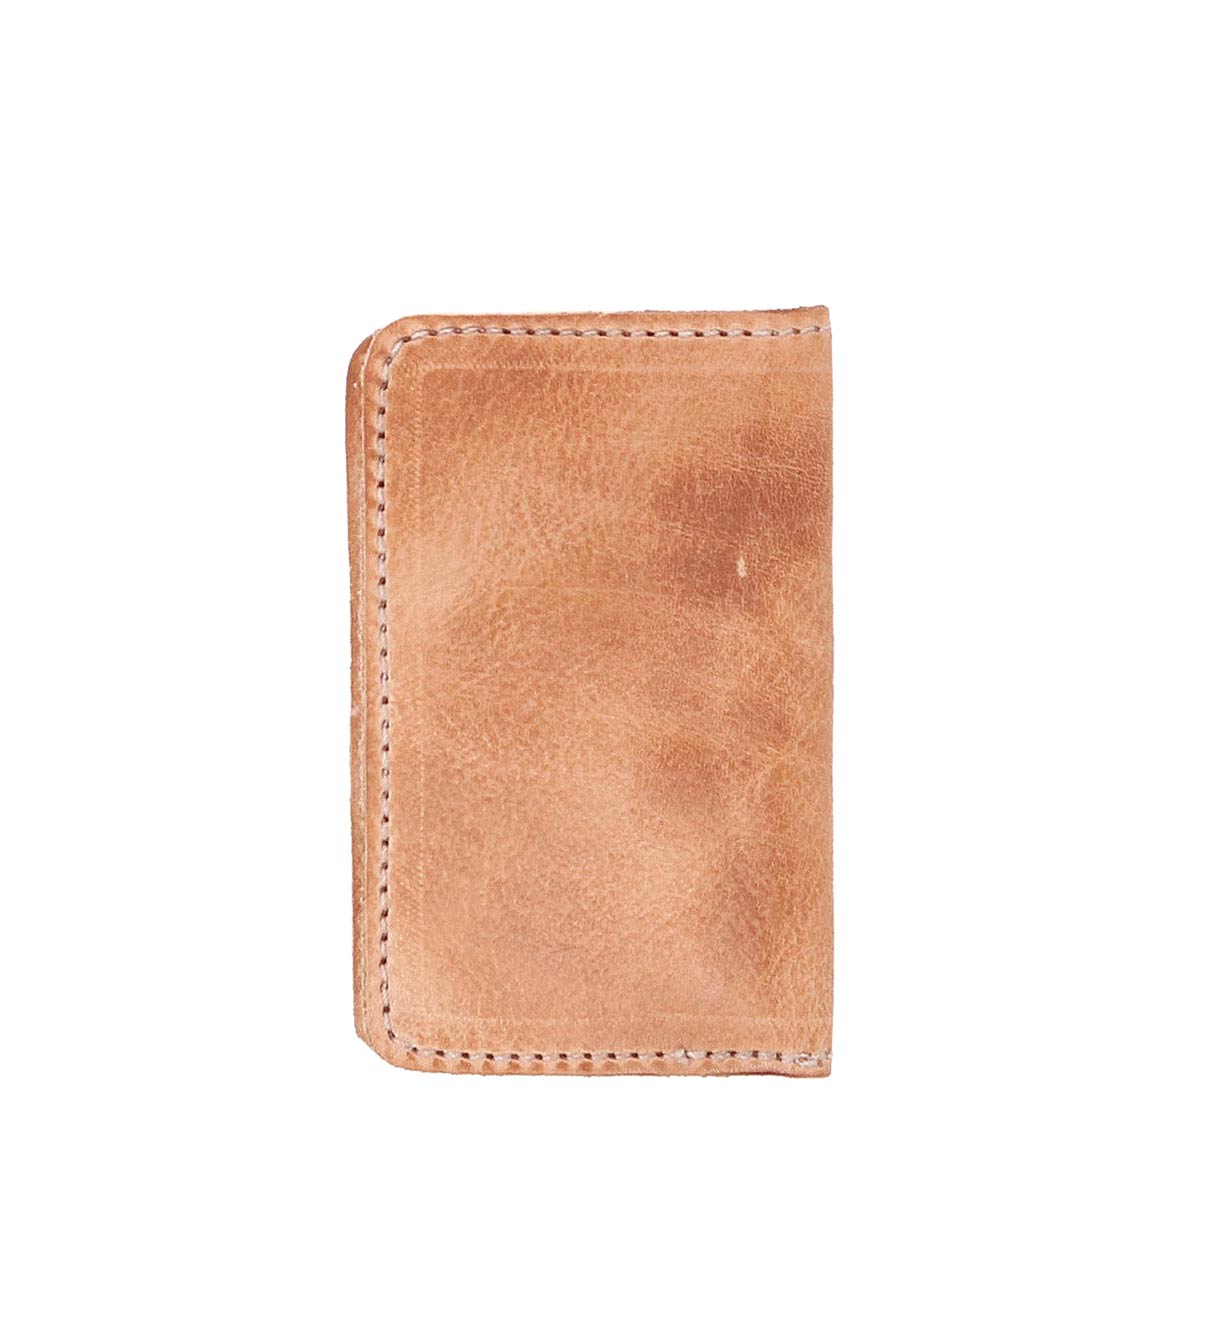 A Heston leather wallet by Bed Stu on a white background.